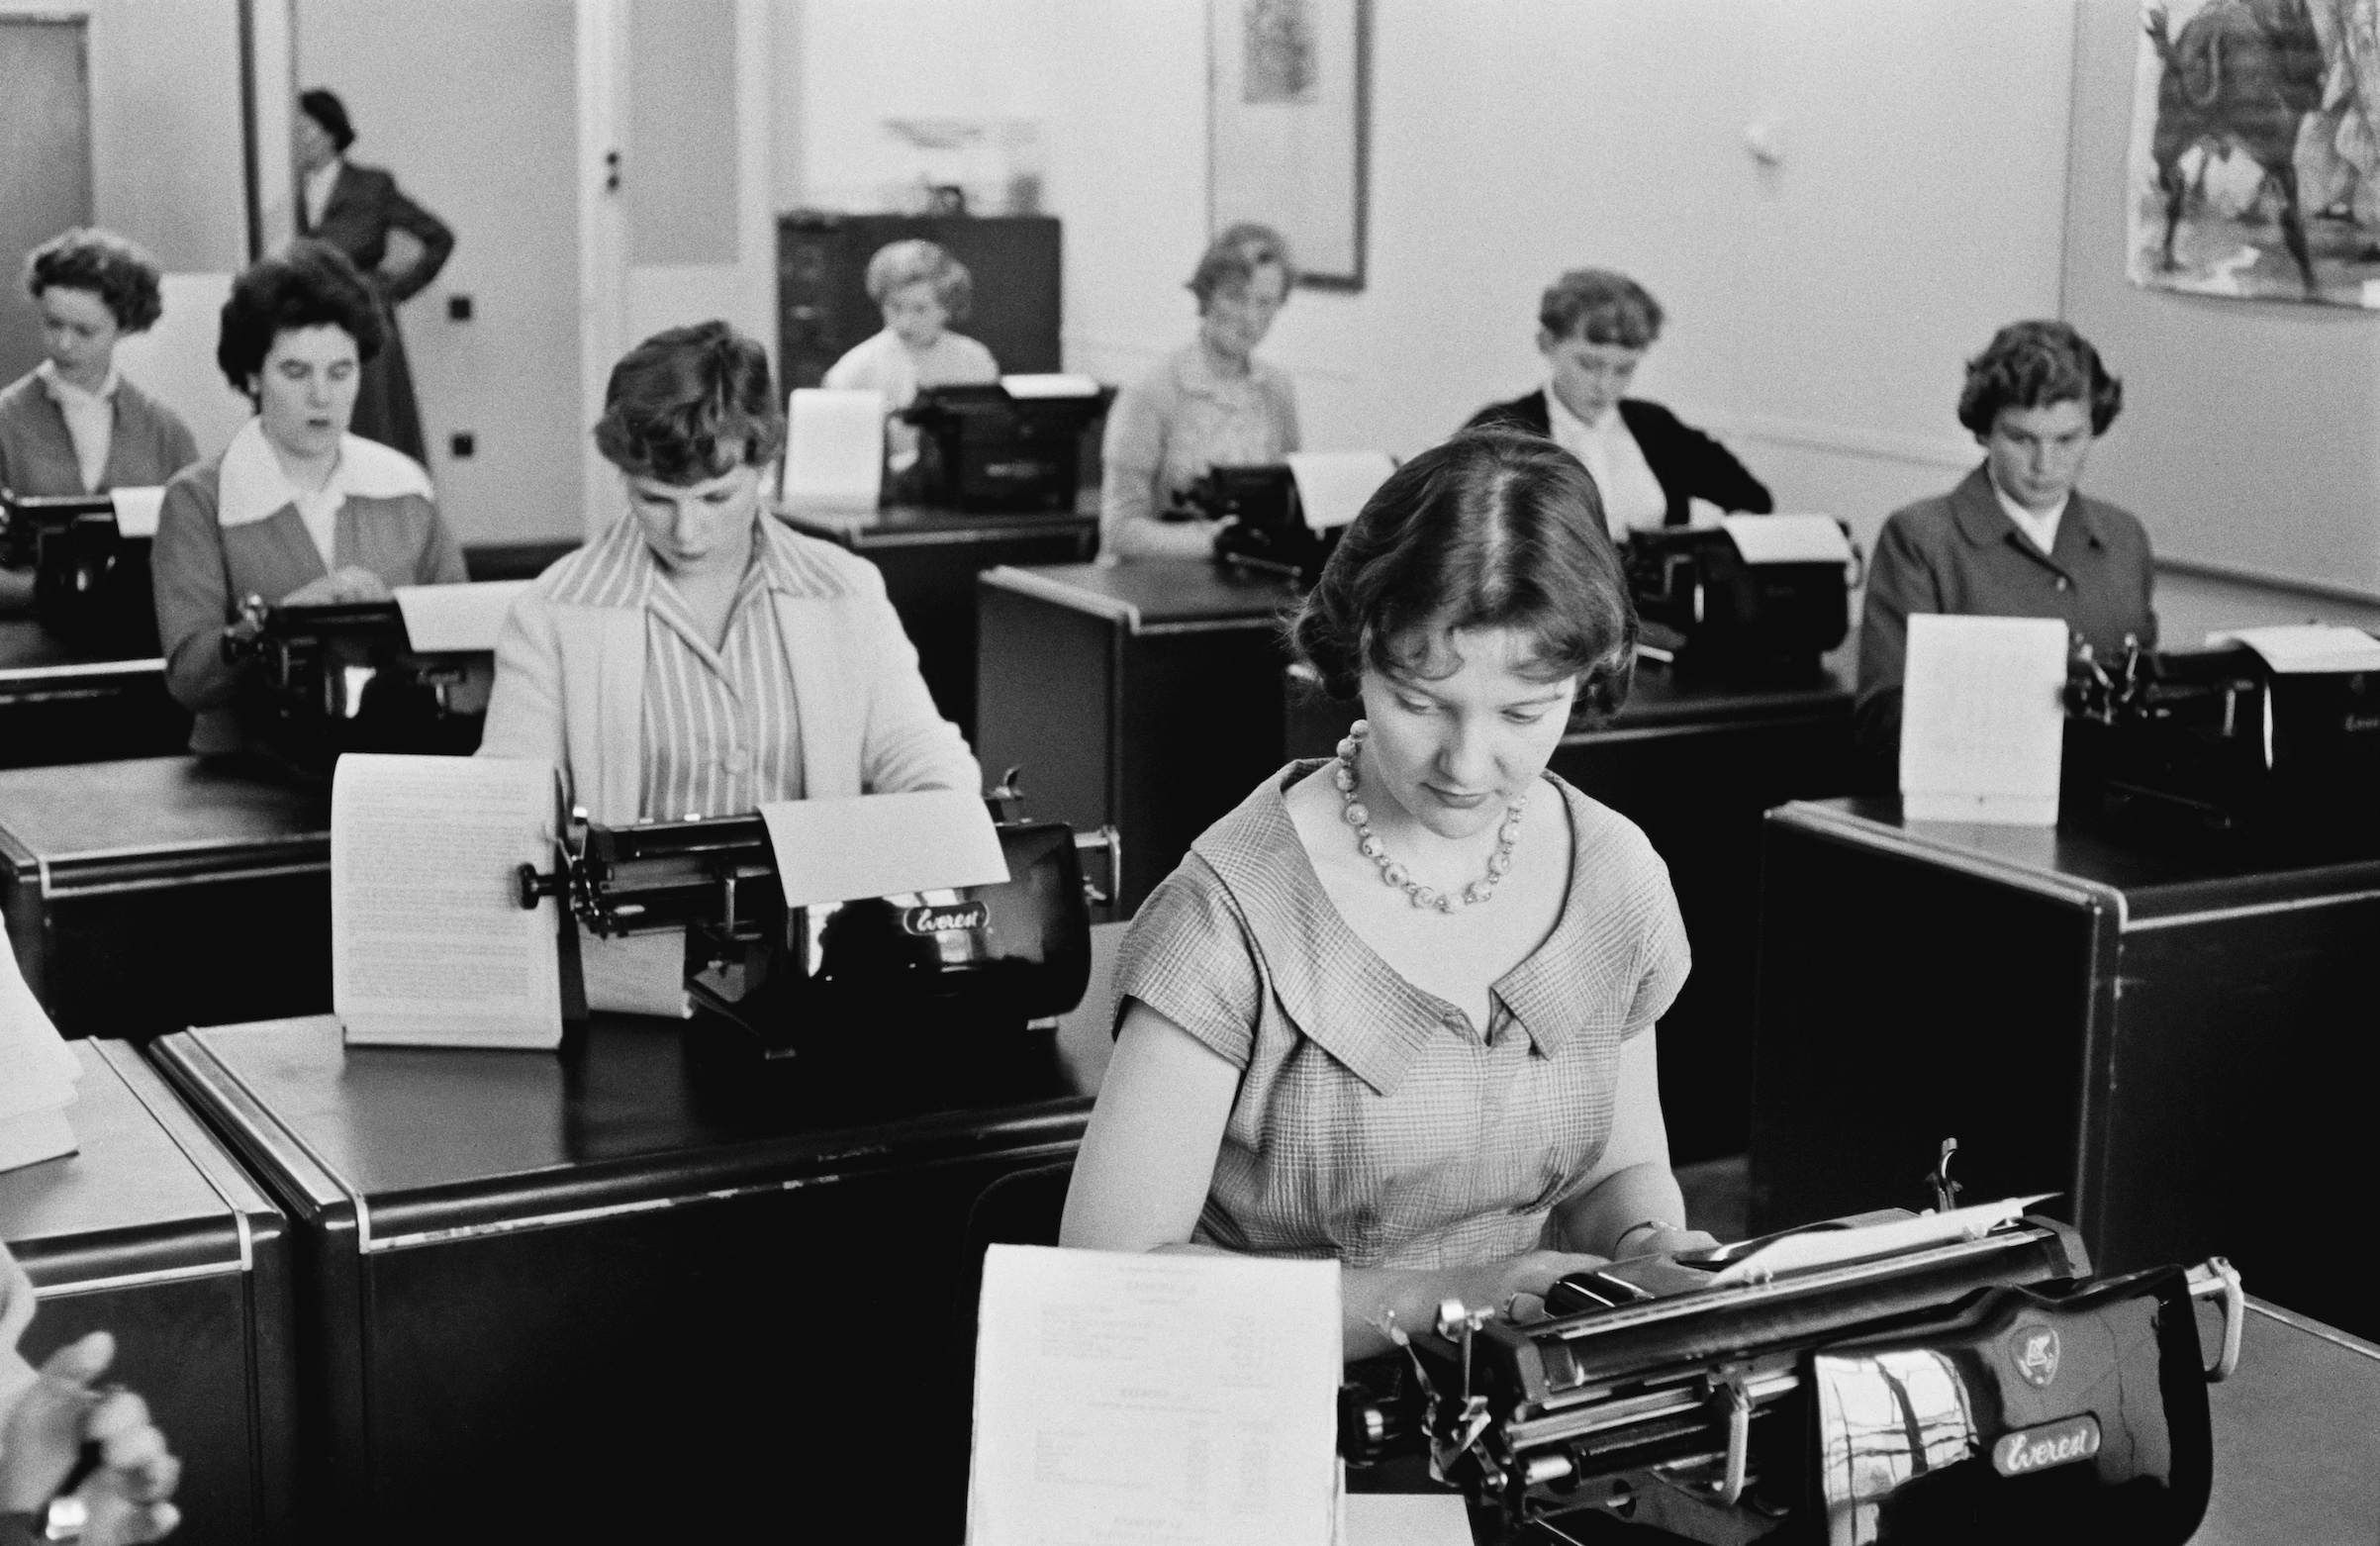 Typists at work at Unilever House in Blackfriars, London, September 1955. (Getty Image)